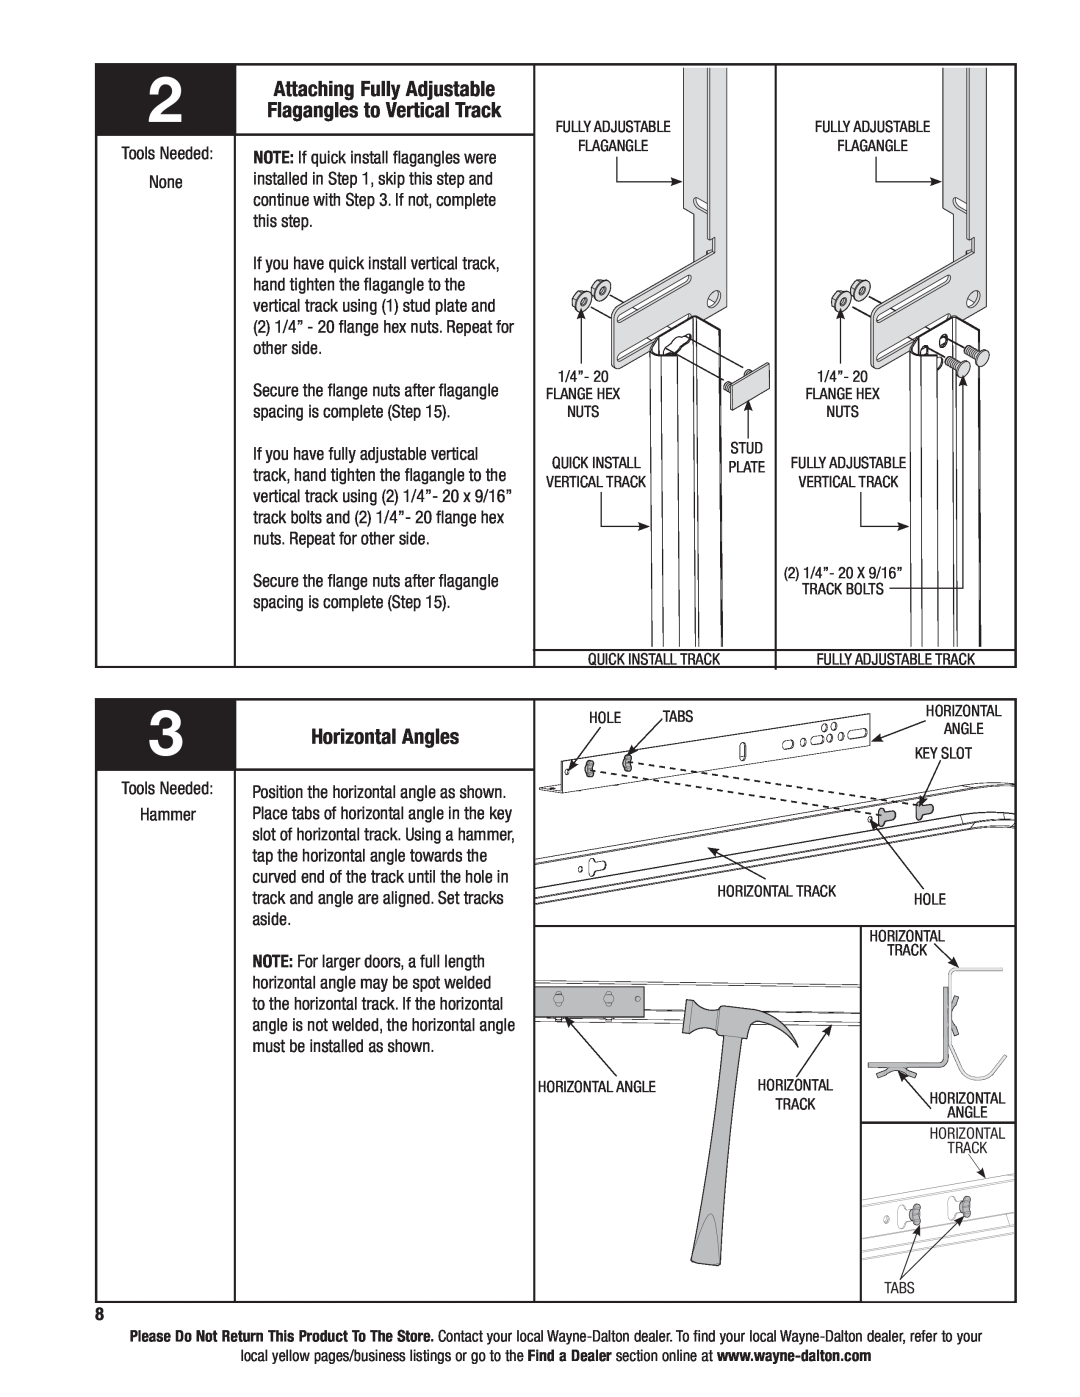 Wayne-Dalton 6100 installation instructions Attaching Fully Adjustable, Flagangles to Vertical Track, Horizontal Angles 